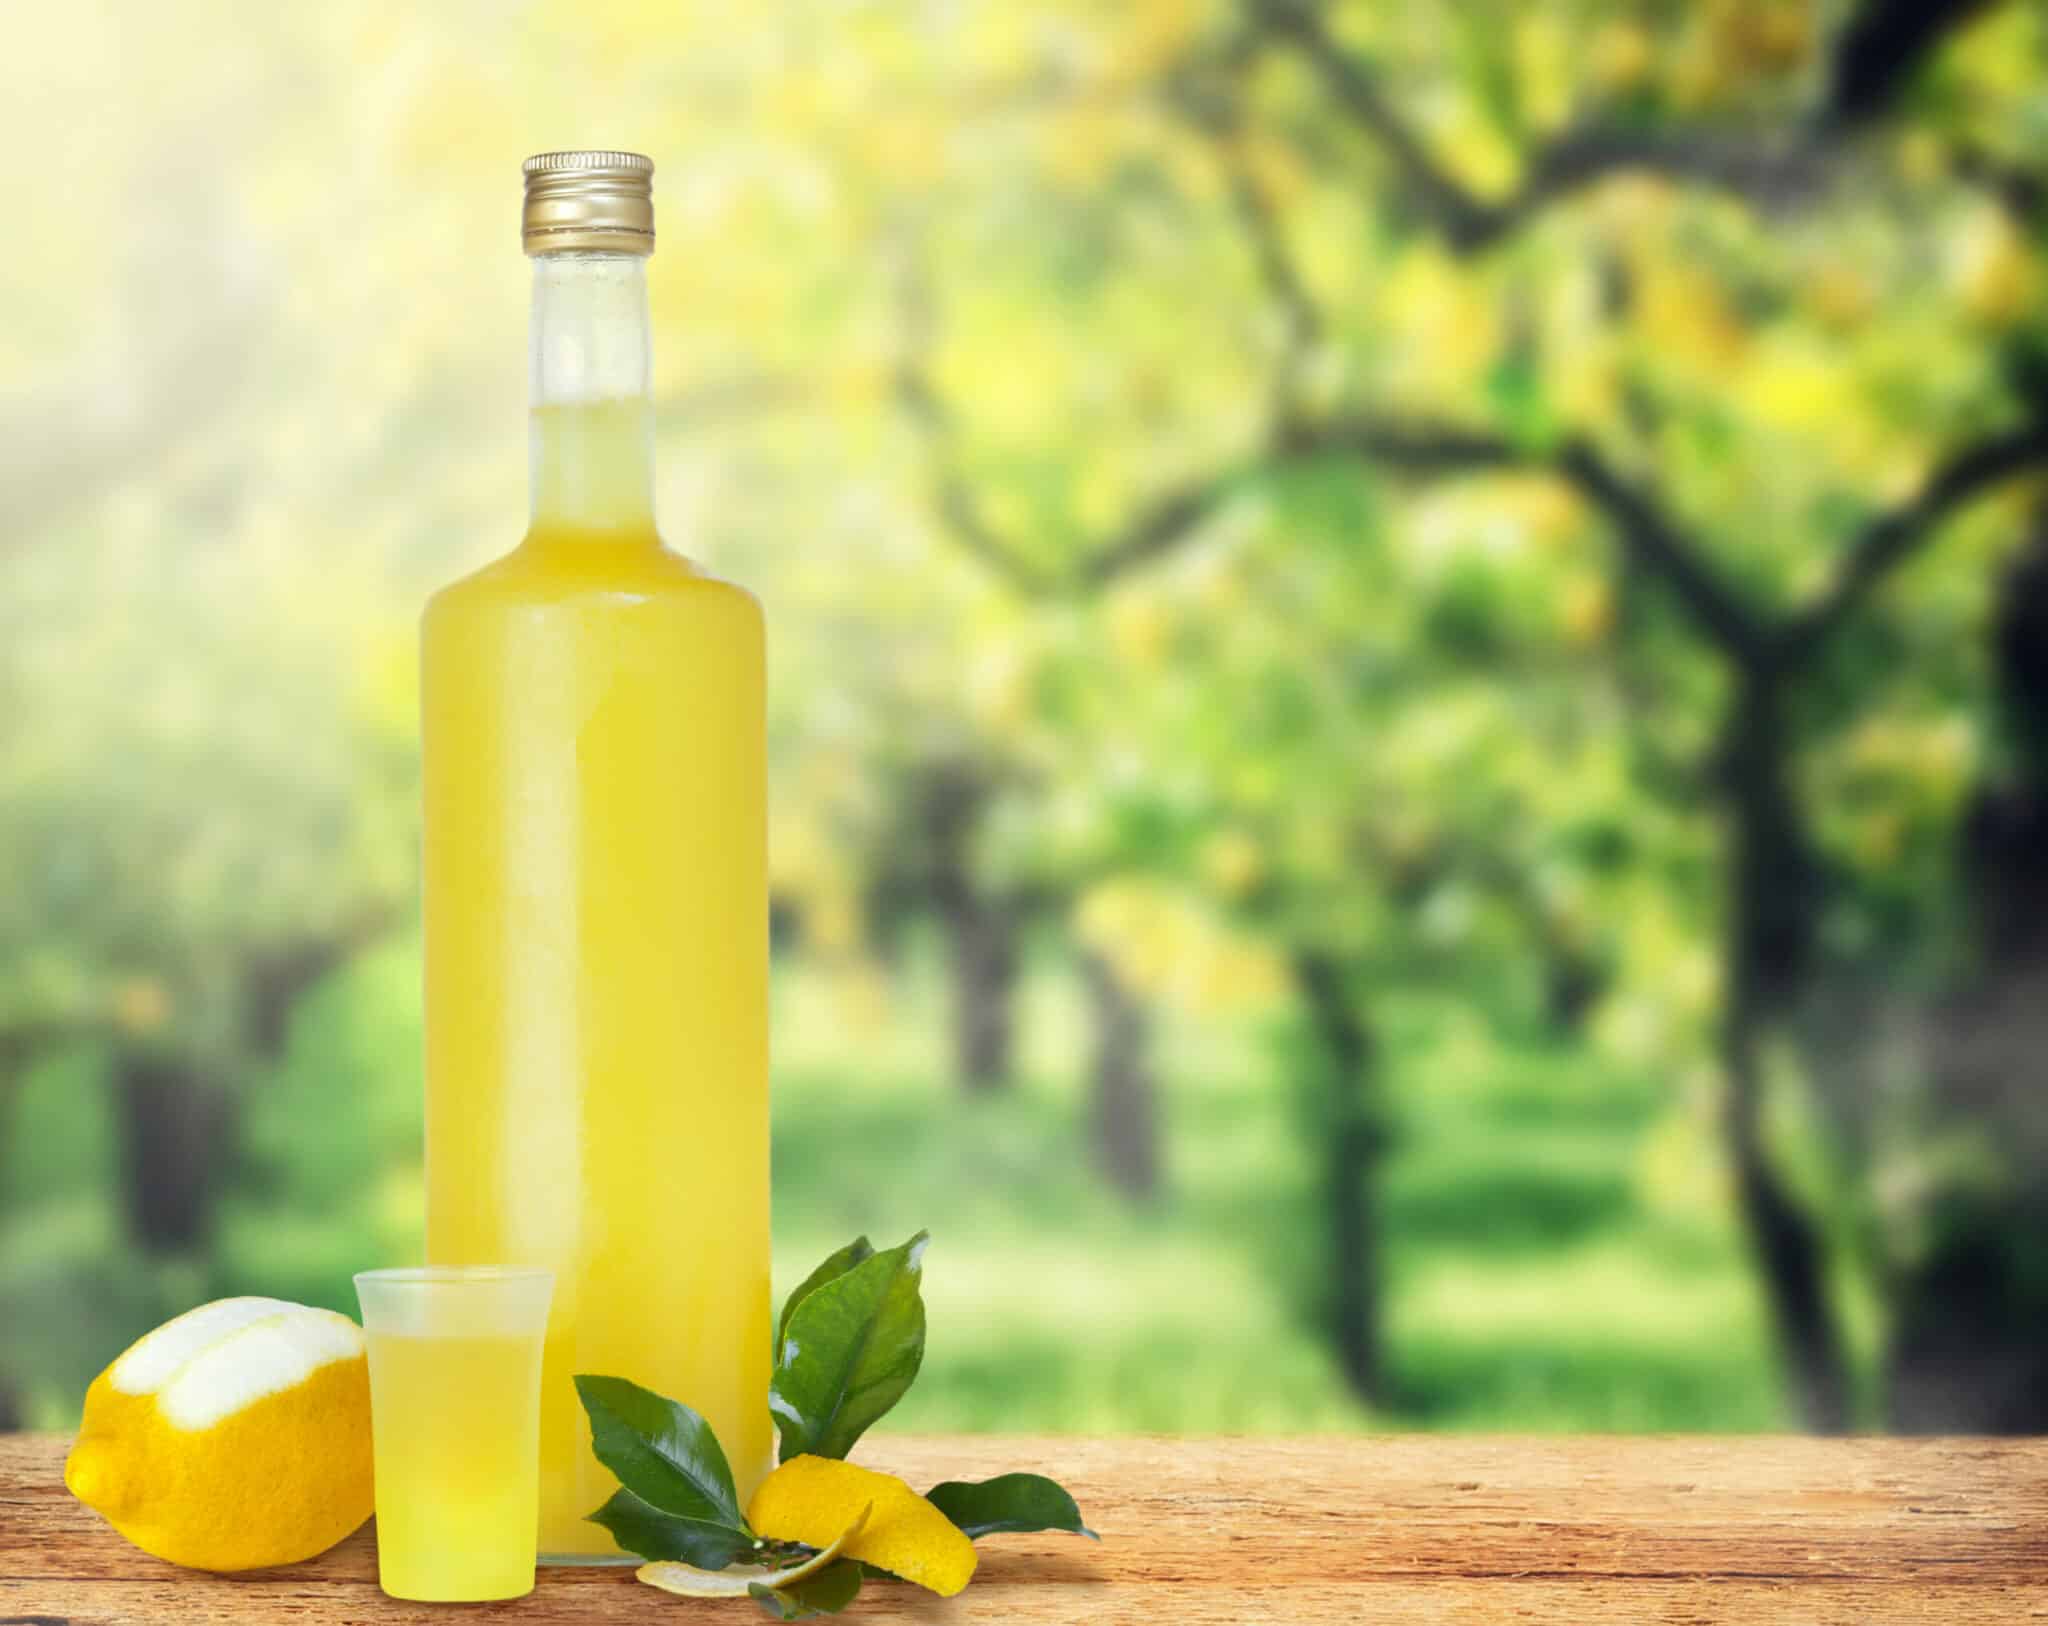 What Does Limoncello Taste Like